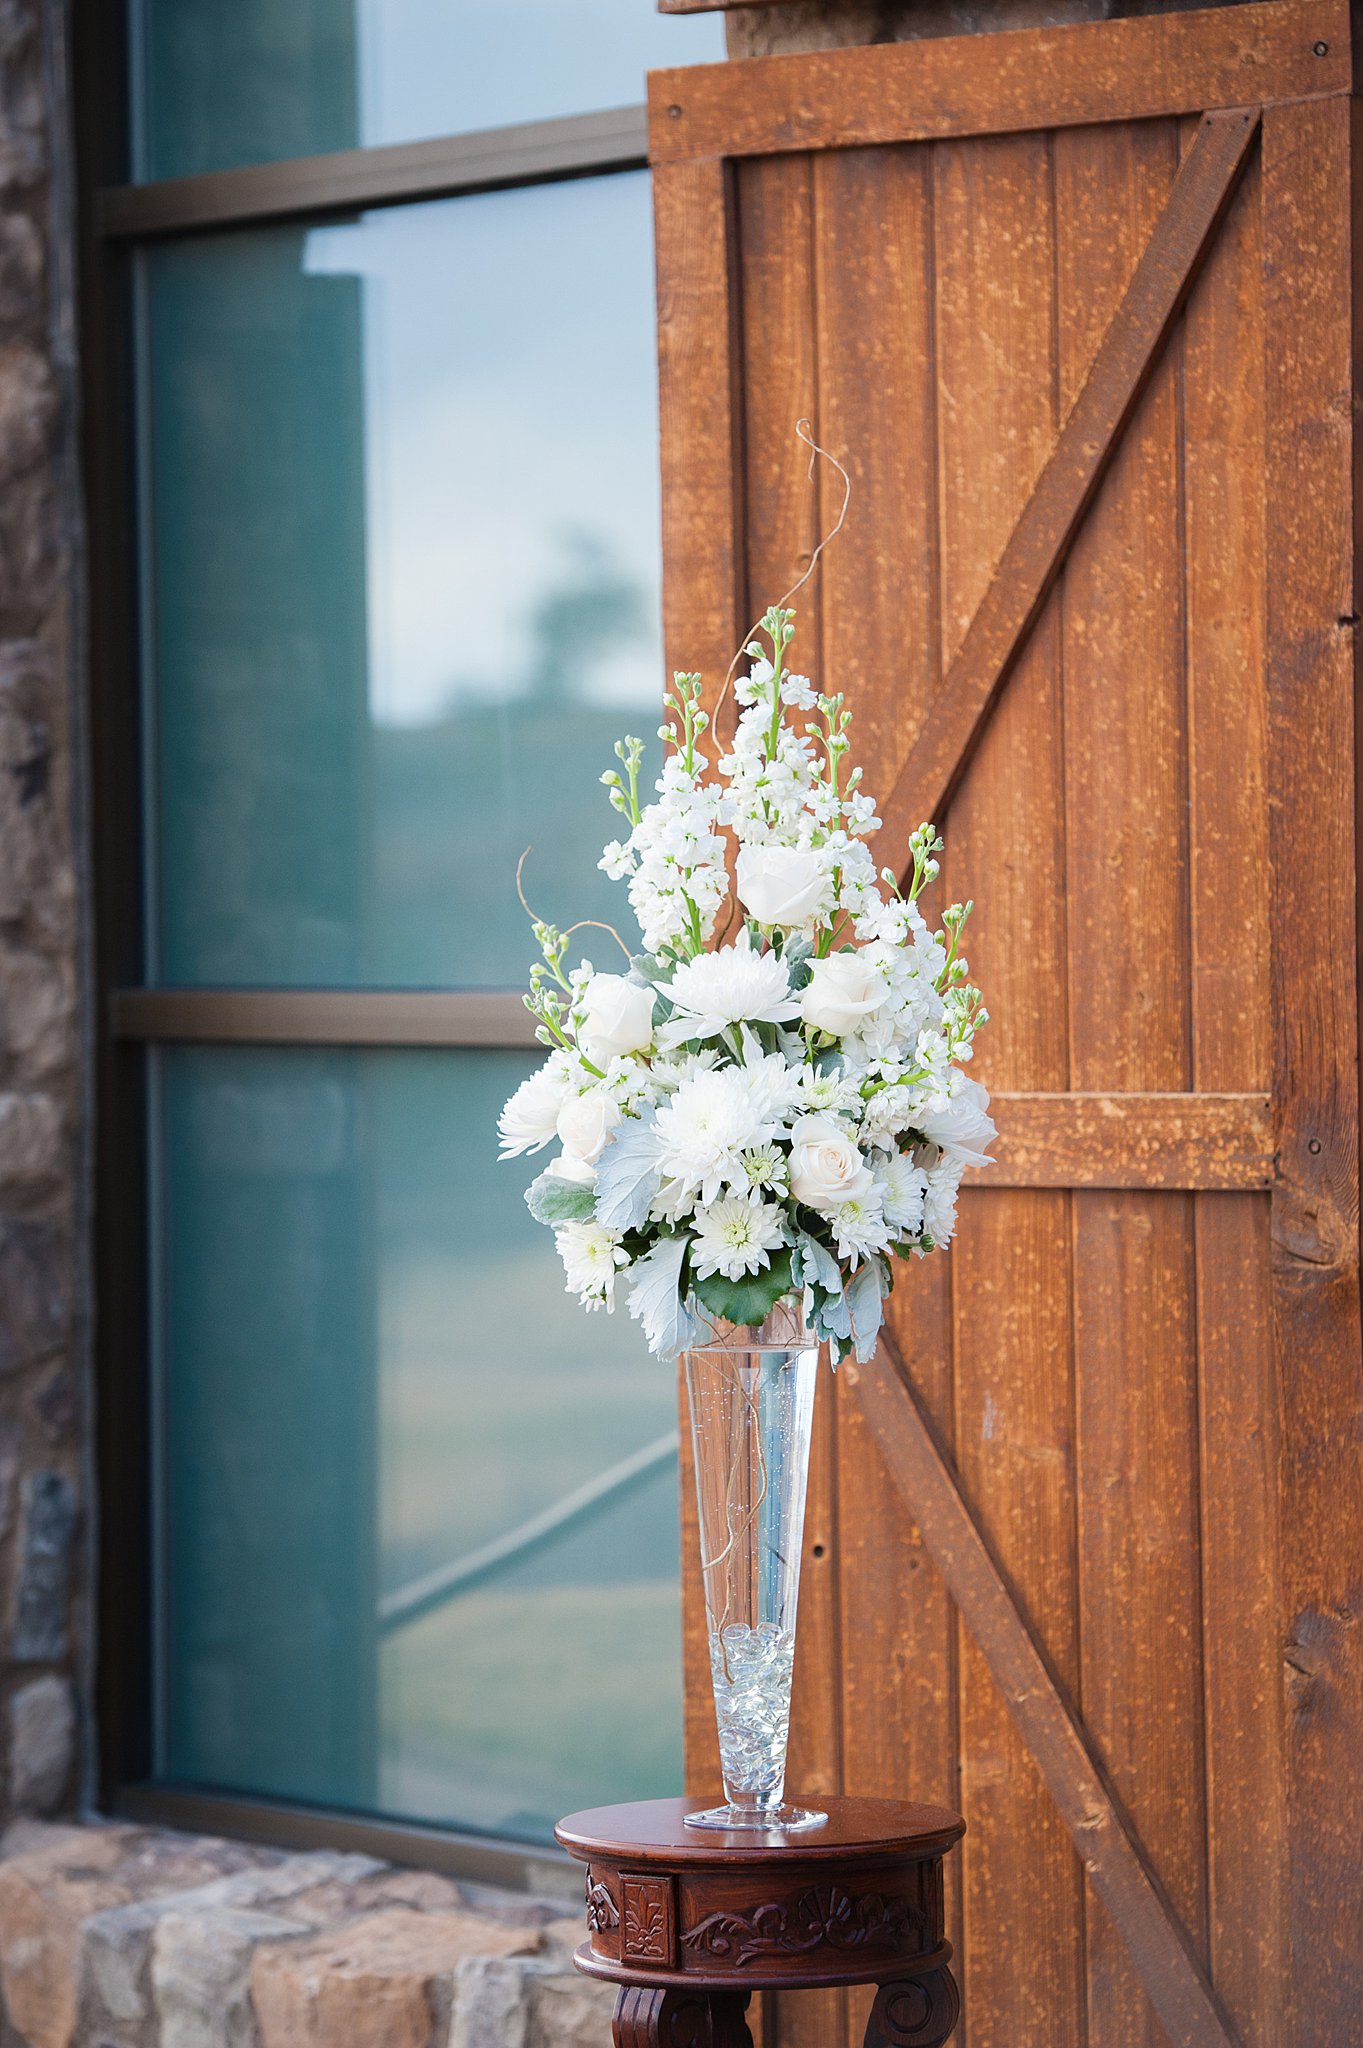 White floral arrangement sits in a glass vase on a wooden table outside